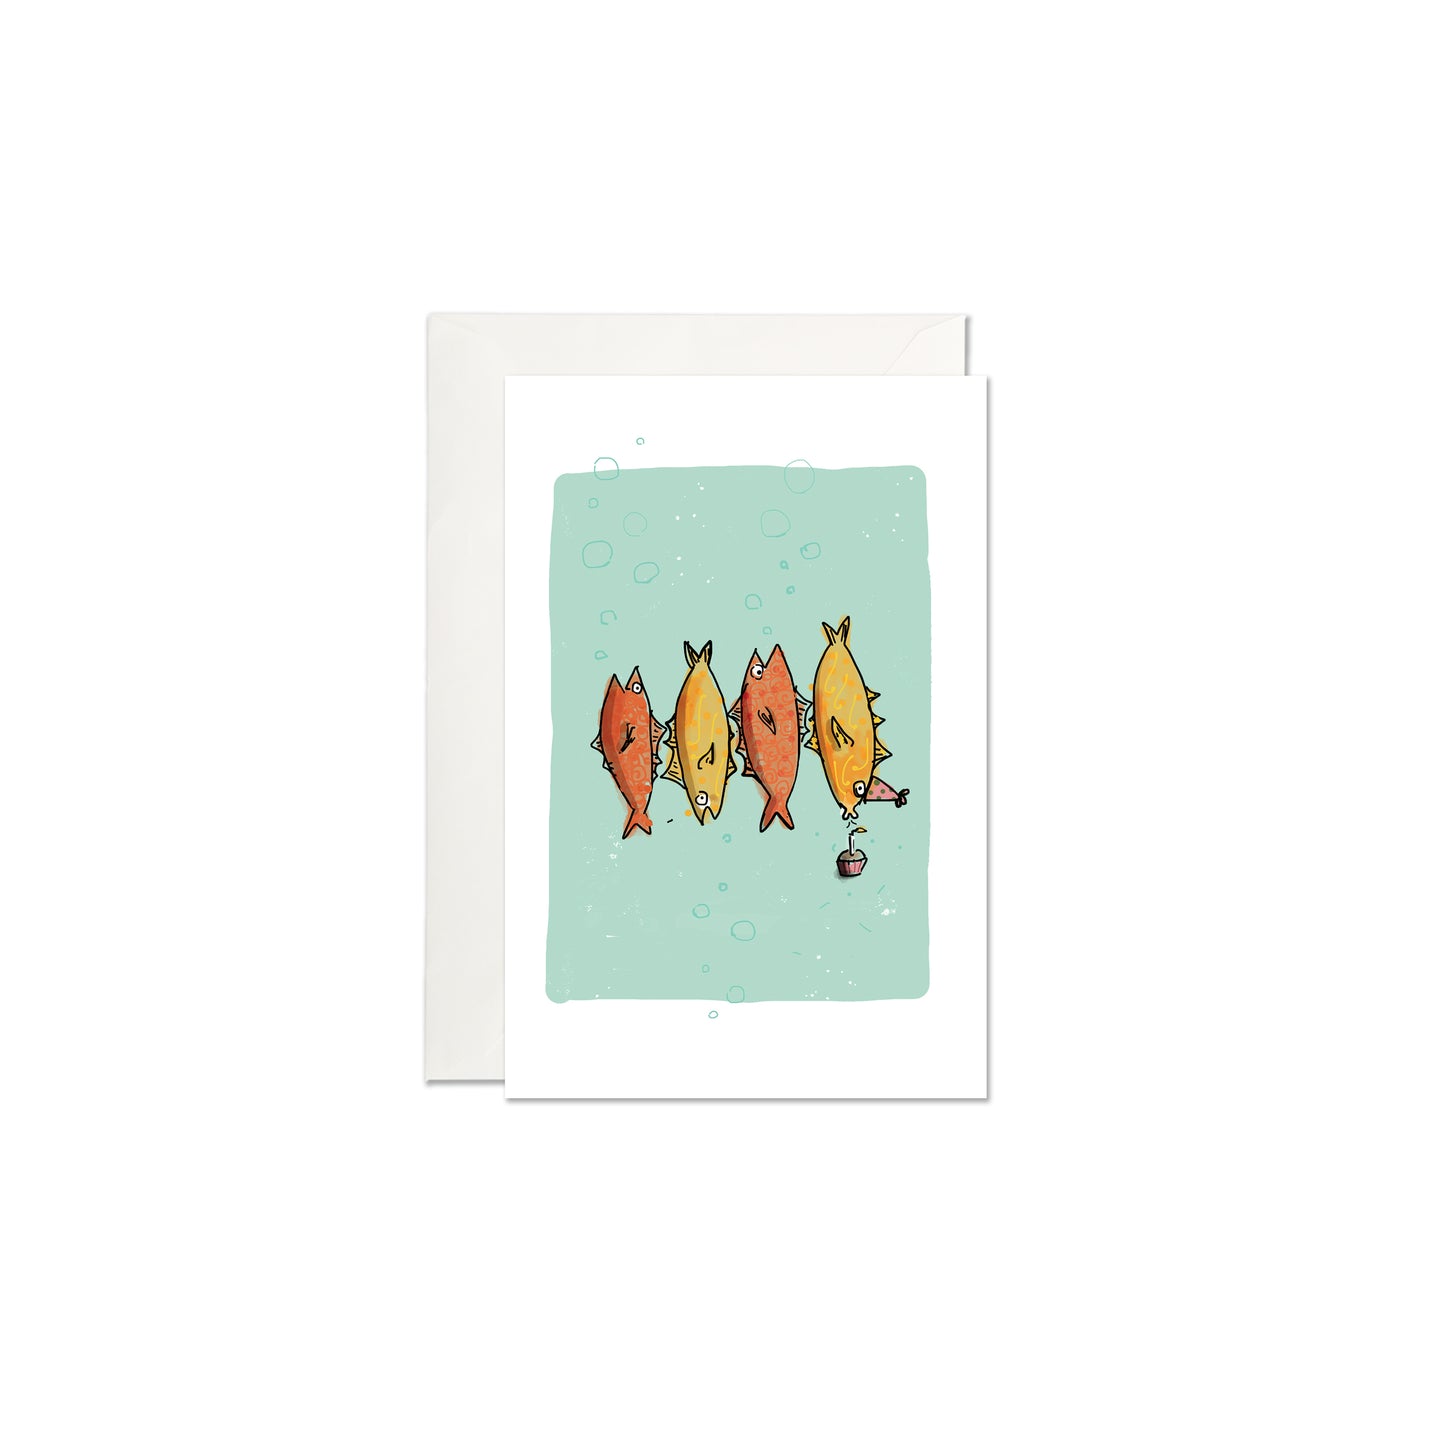 birthday fishes card